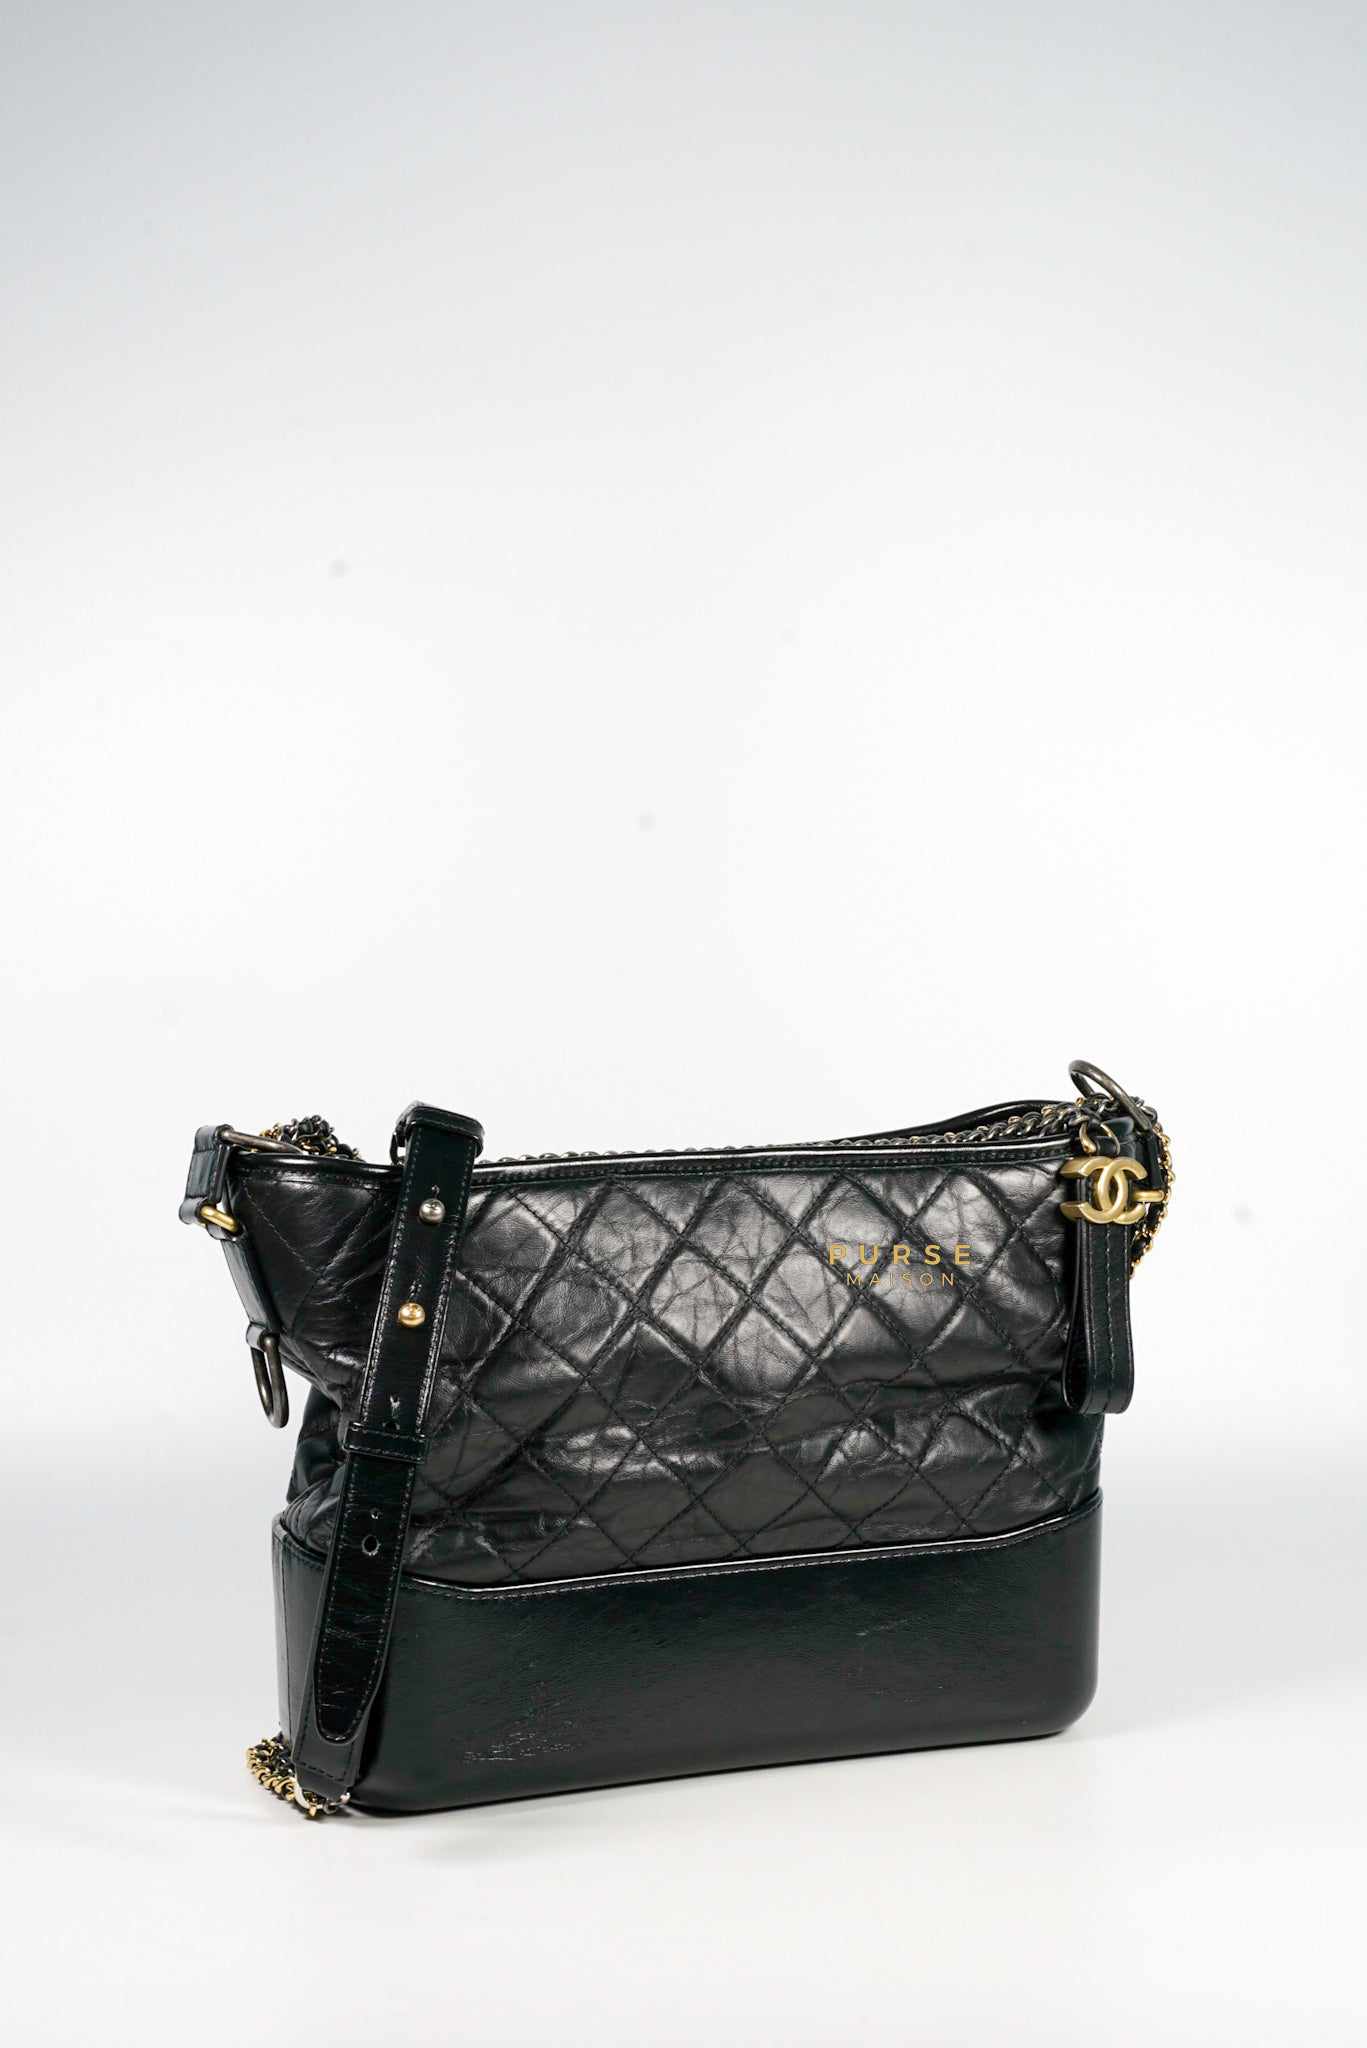 Chanel Gabrielle Medium Hobo Bag in Black Distressed Calfskin Leather & mixed hardware (Series 25)